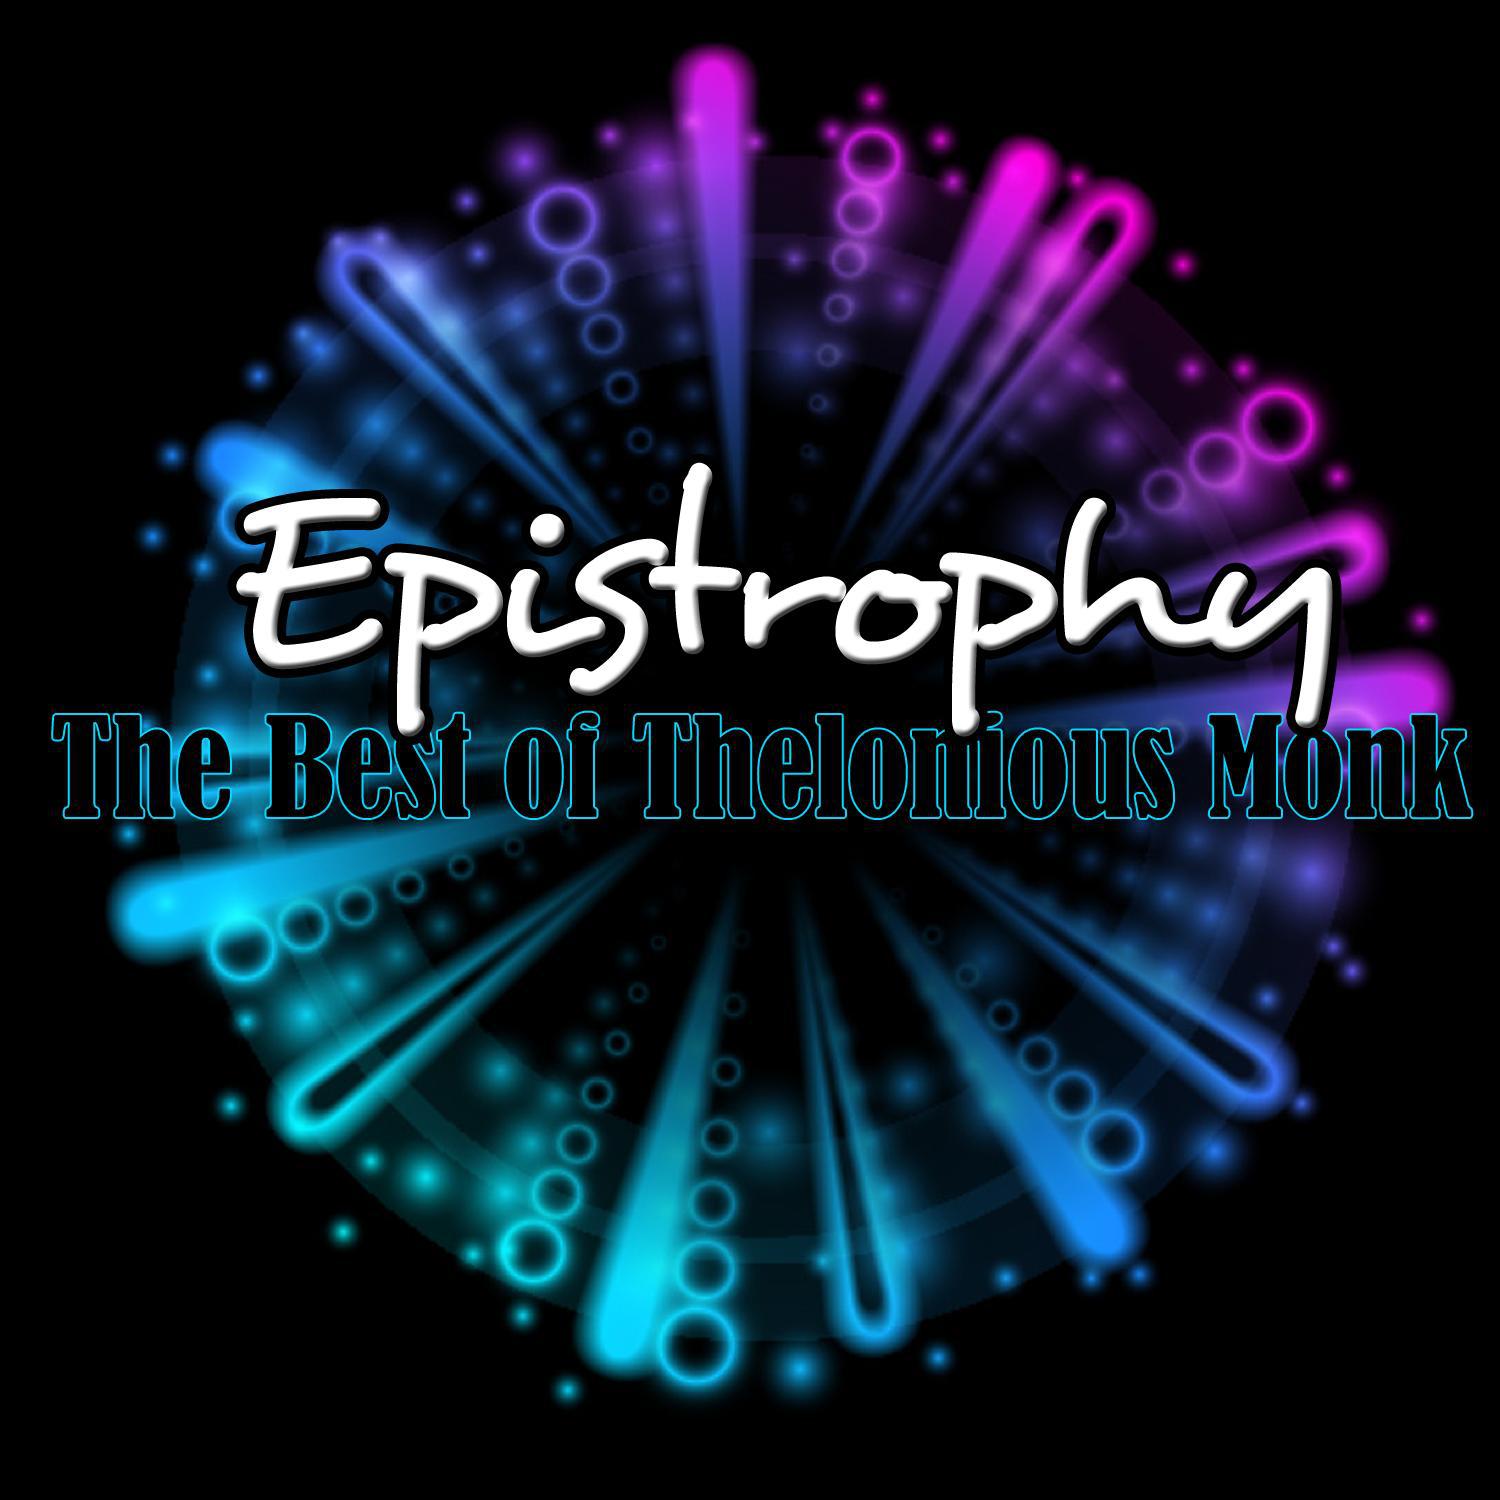 Epistrophy - The Best of Thelonious Monk专辑